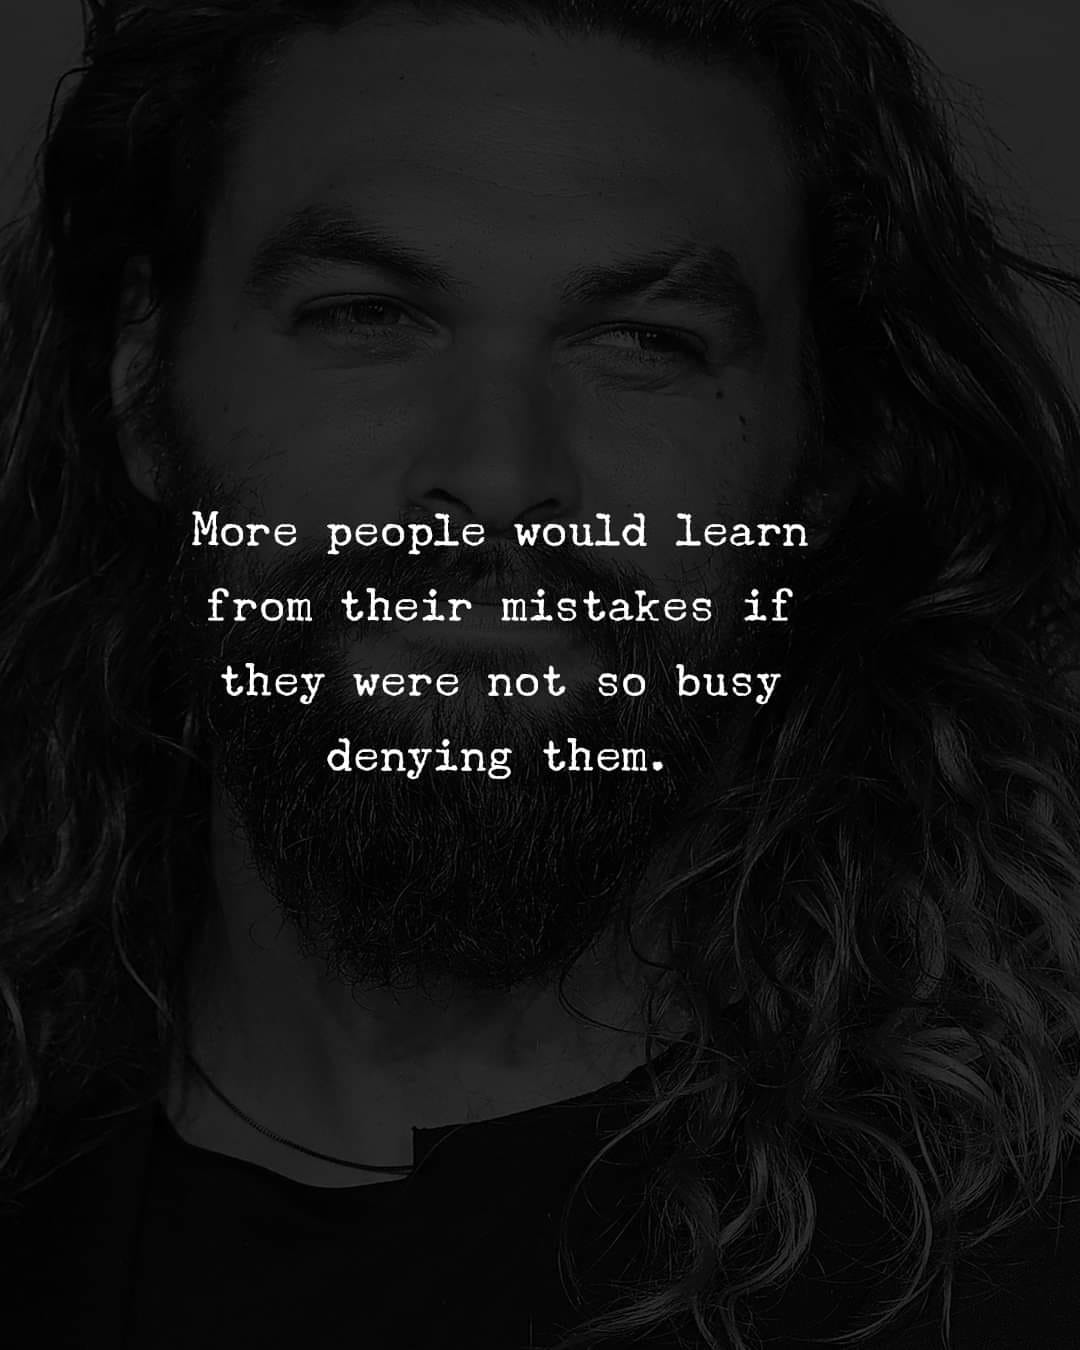 More people would learn from their mistakes if they weren’t so busy denying them.